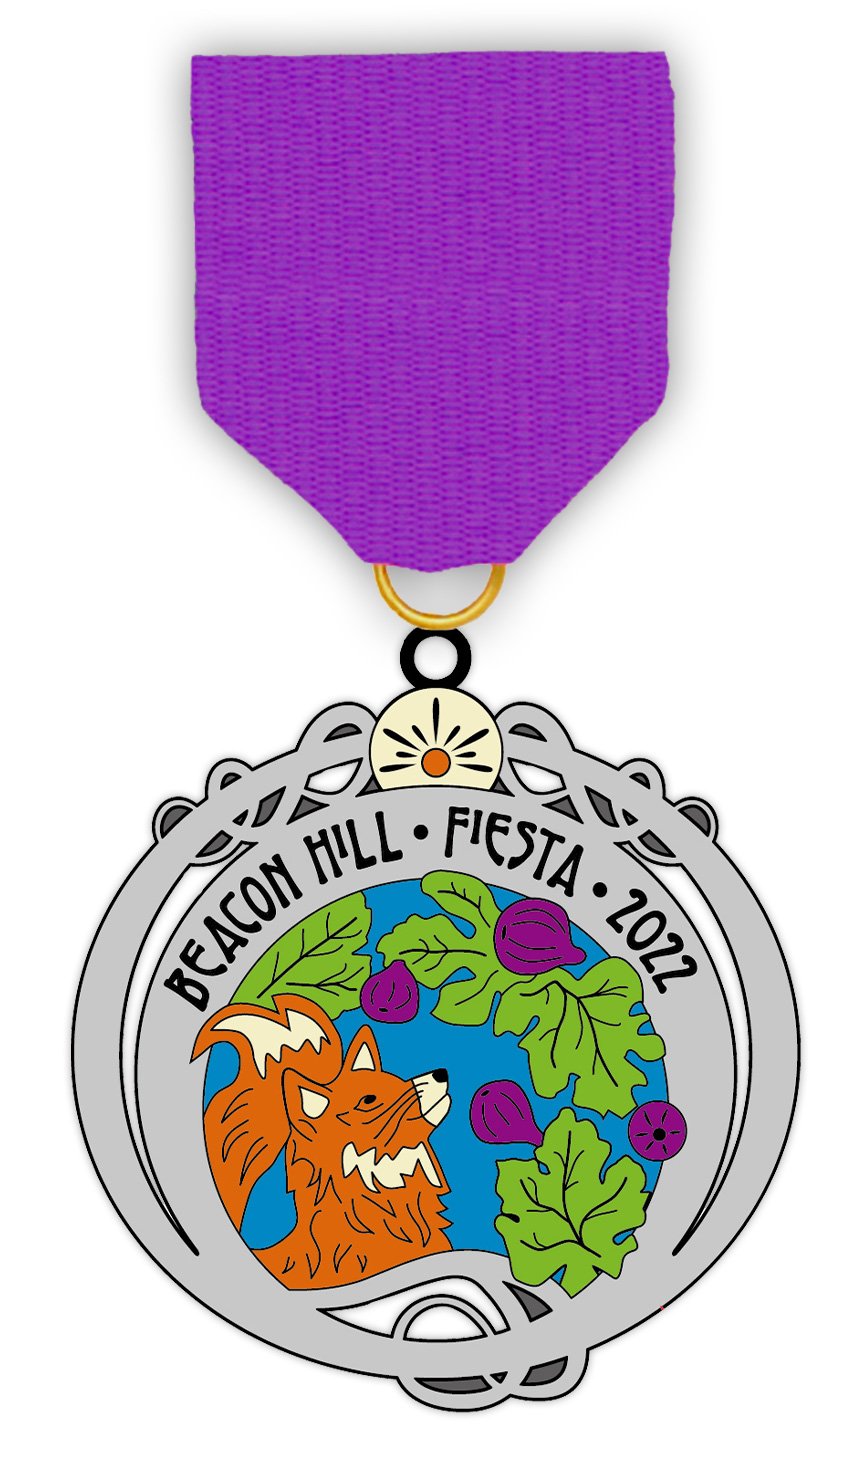 The colorful history of Fiesta medals